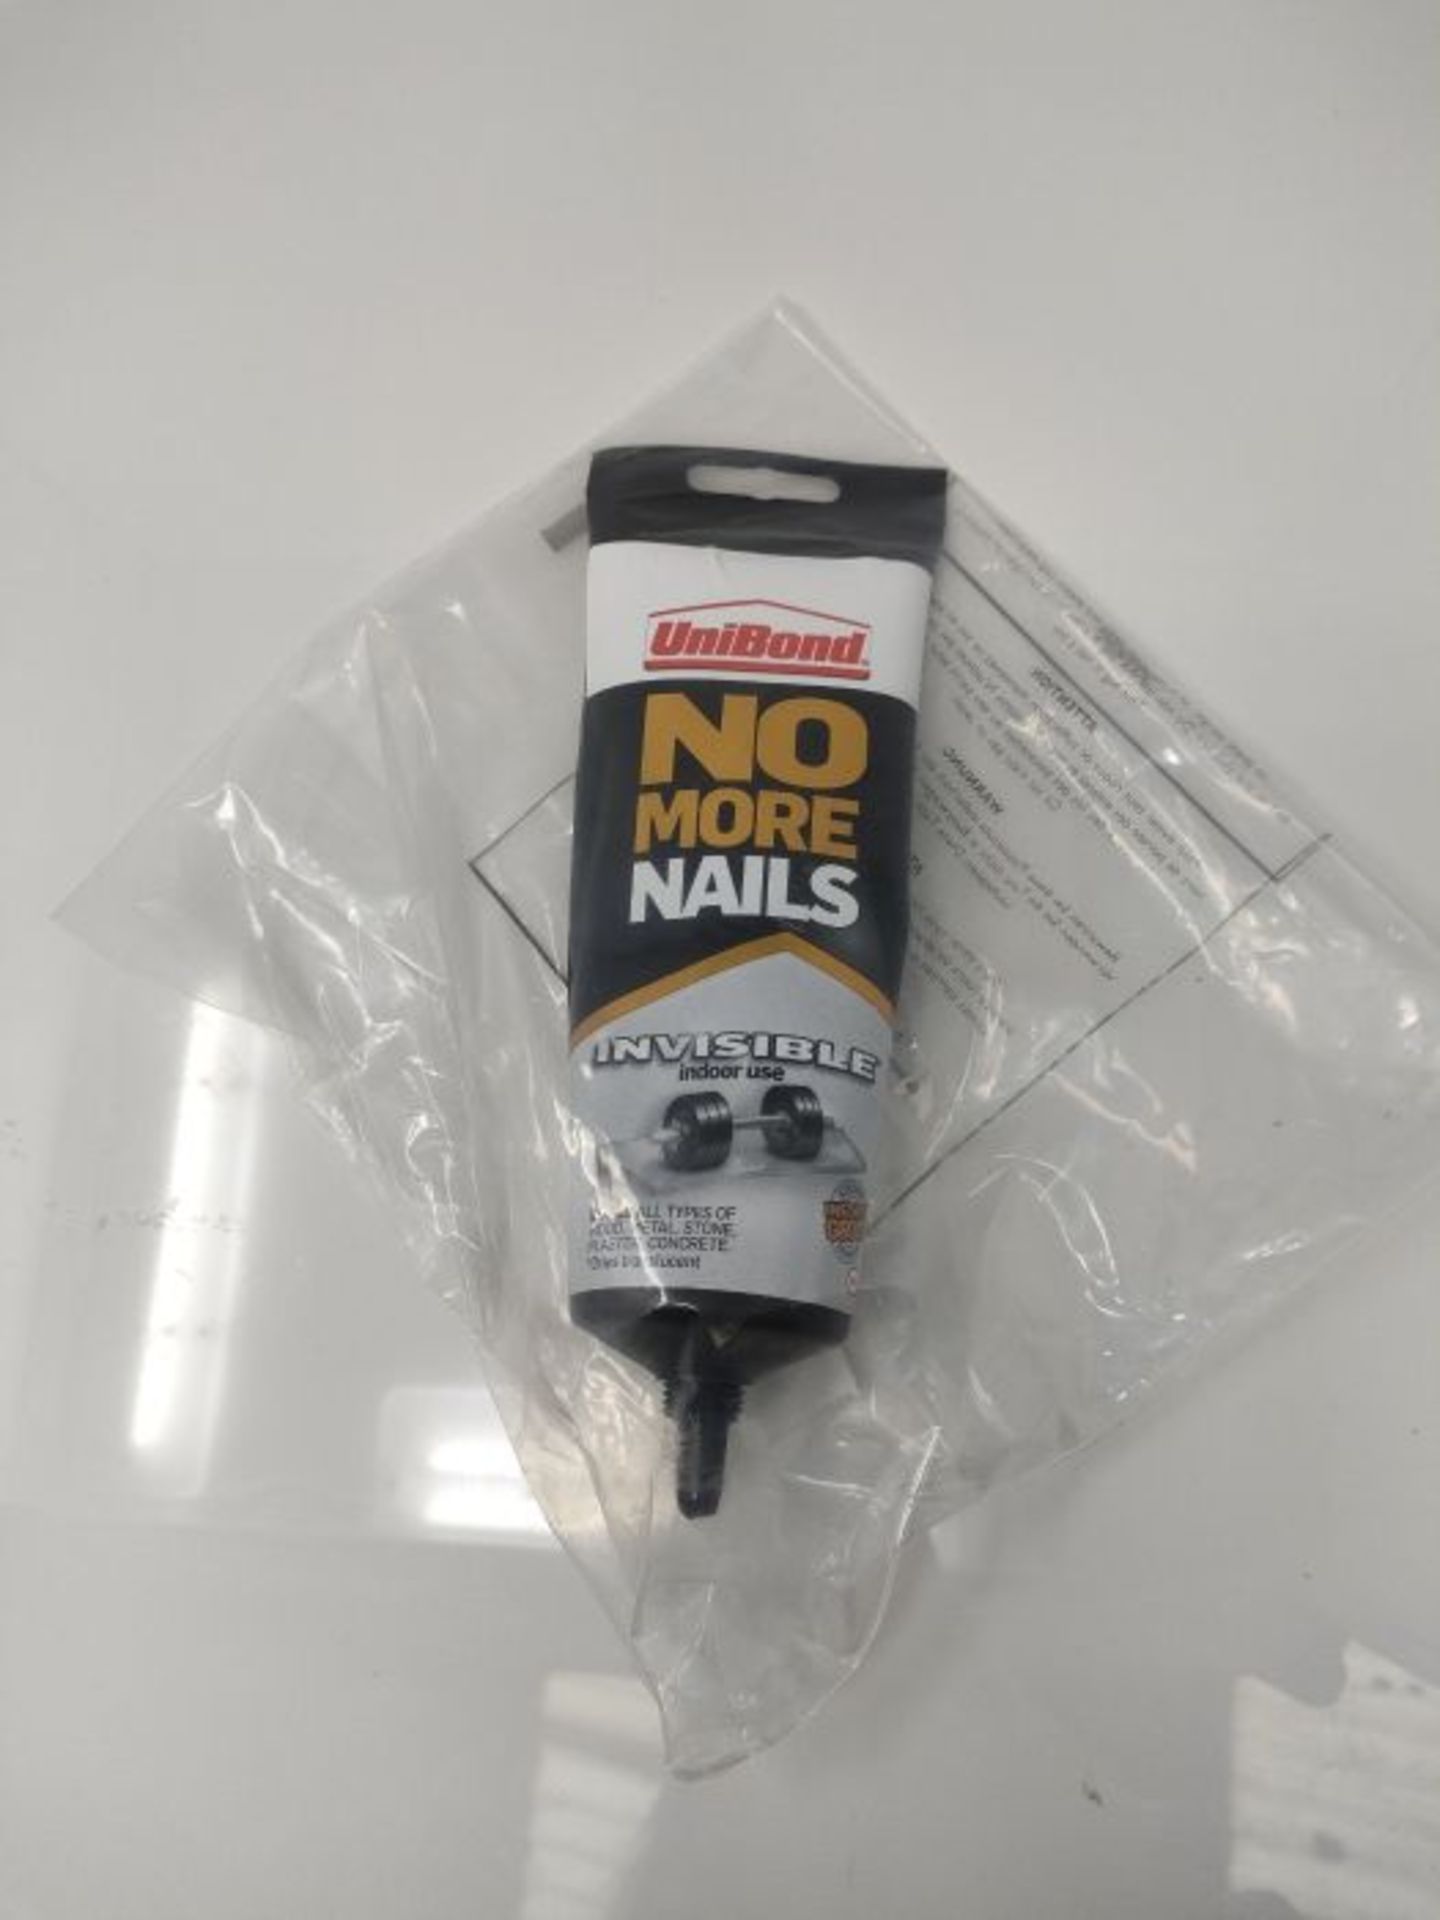 [INCOMPLETE] UniBond 1963625 No More Nails Invisible, Heavy-Duty Clear Glue, Strong Gl - Image 2 of 3